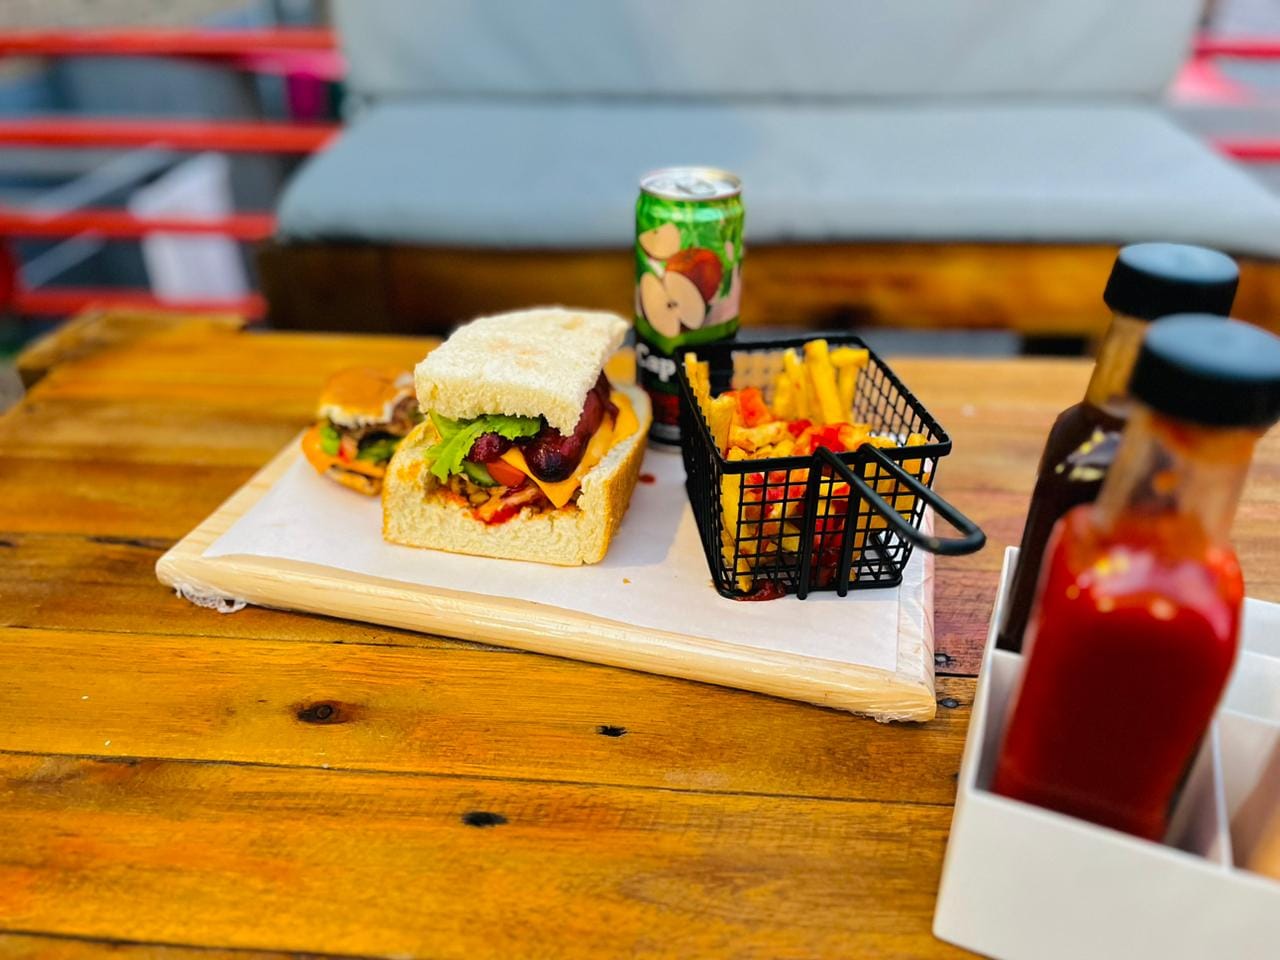 You can turn your Kota and Chisanyama business into a franchise - Here's how!